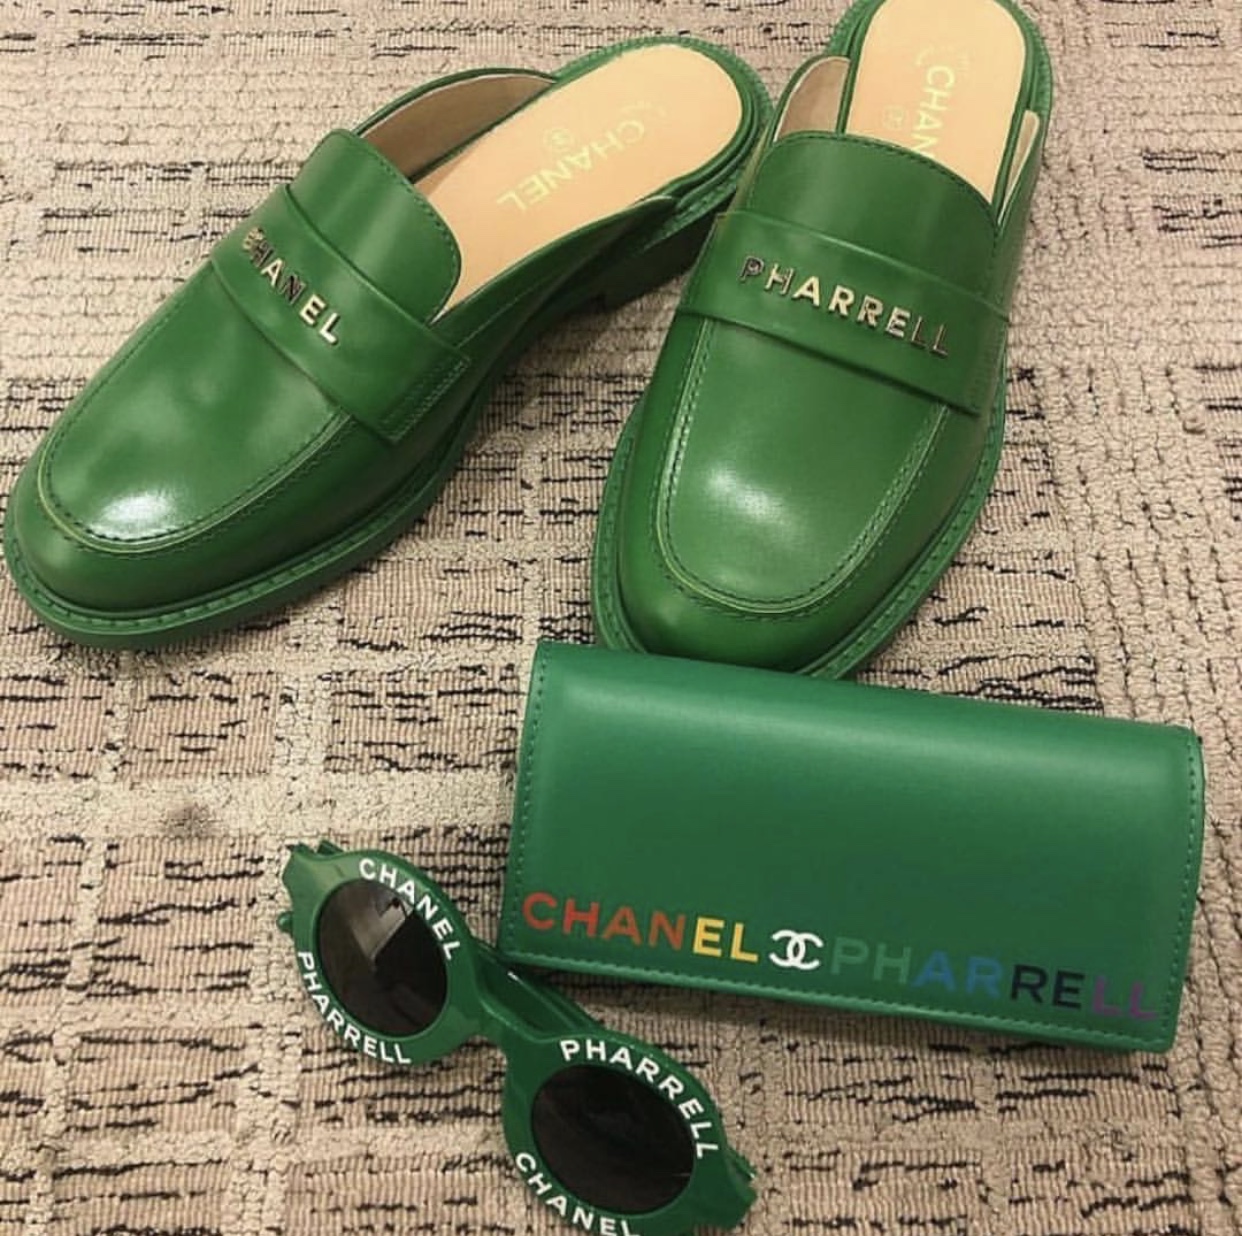 pharrell and chanel collection